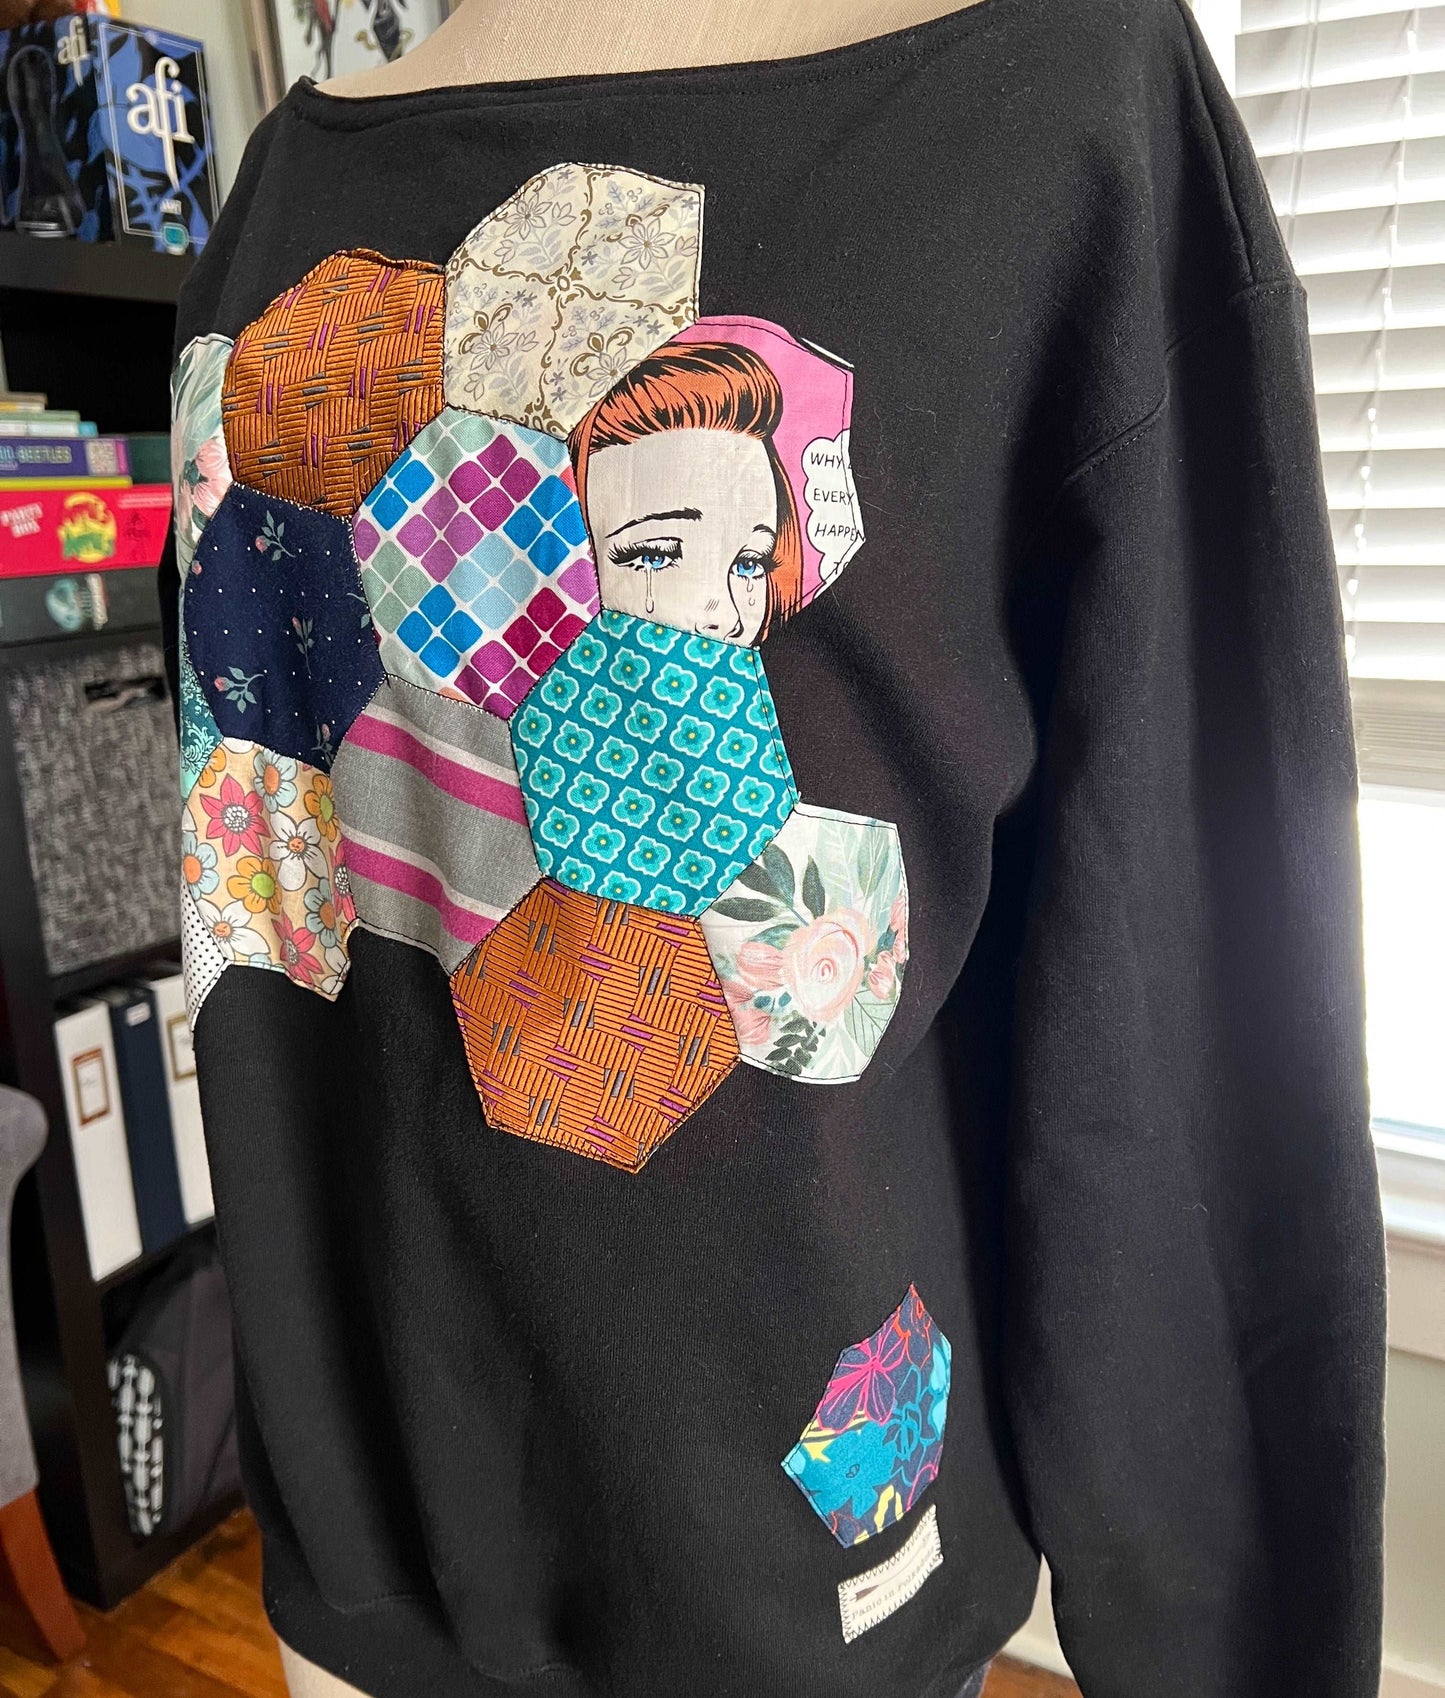 5 Panic Clothing - Quilt-Block Crew - Choose Your Style!